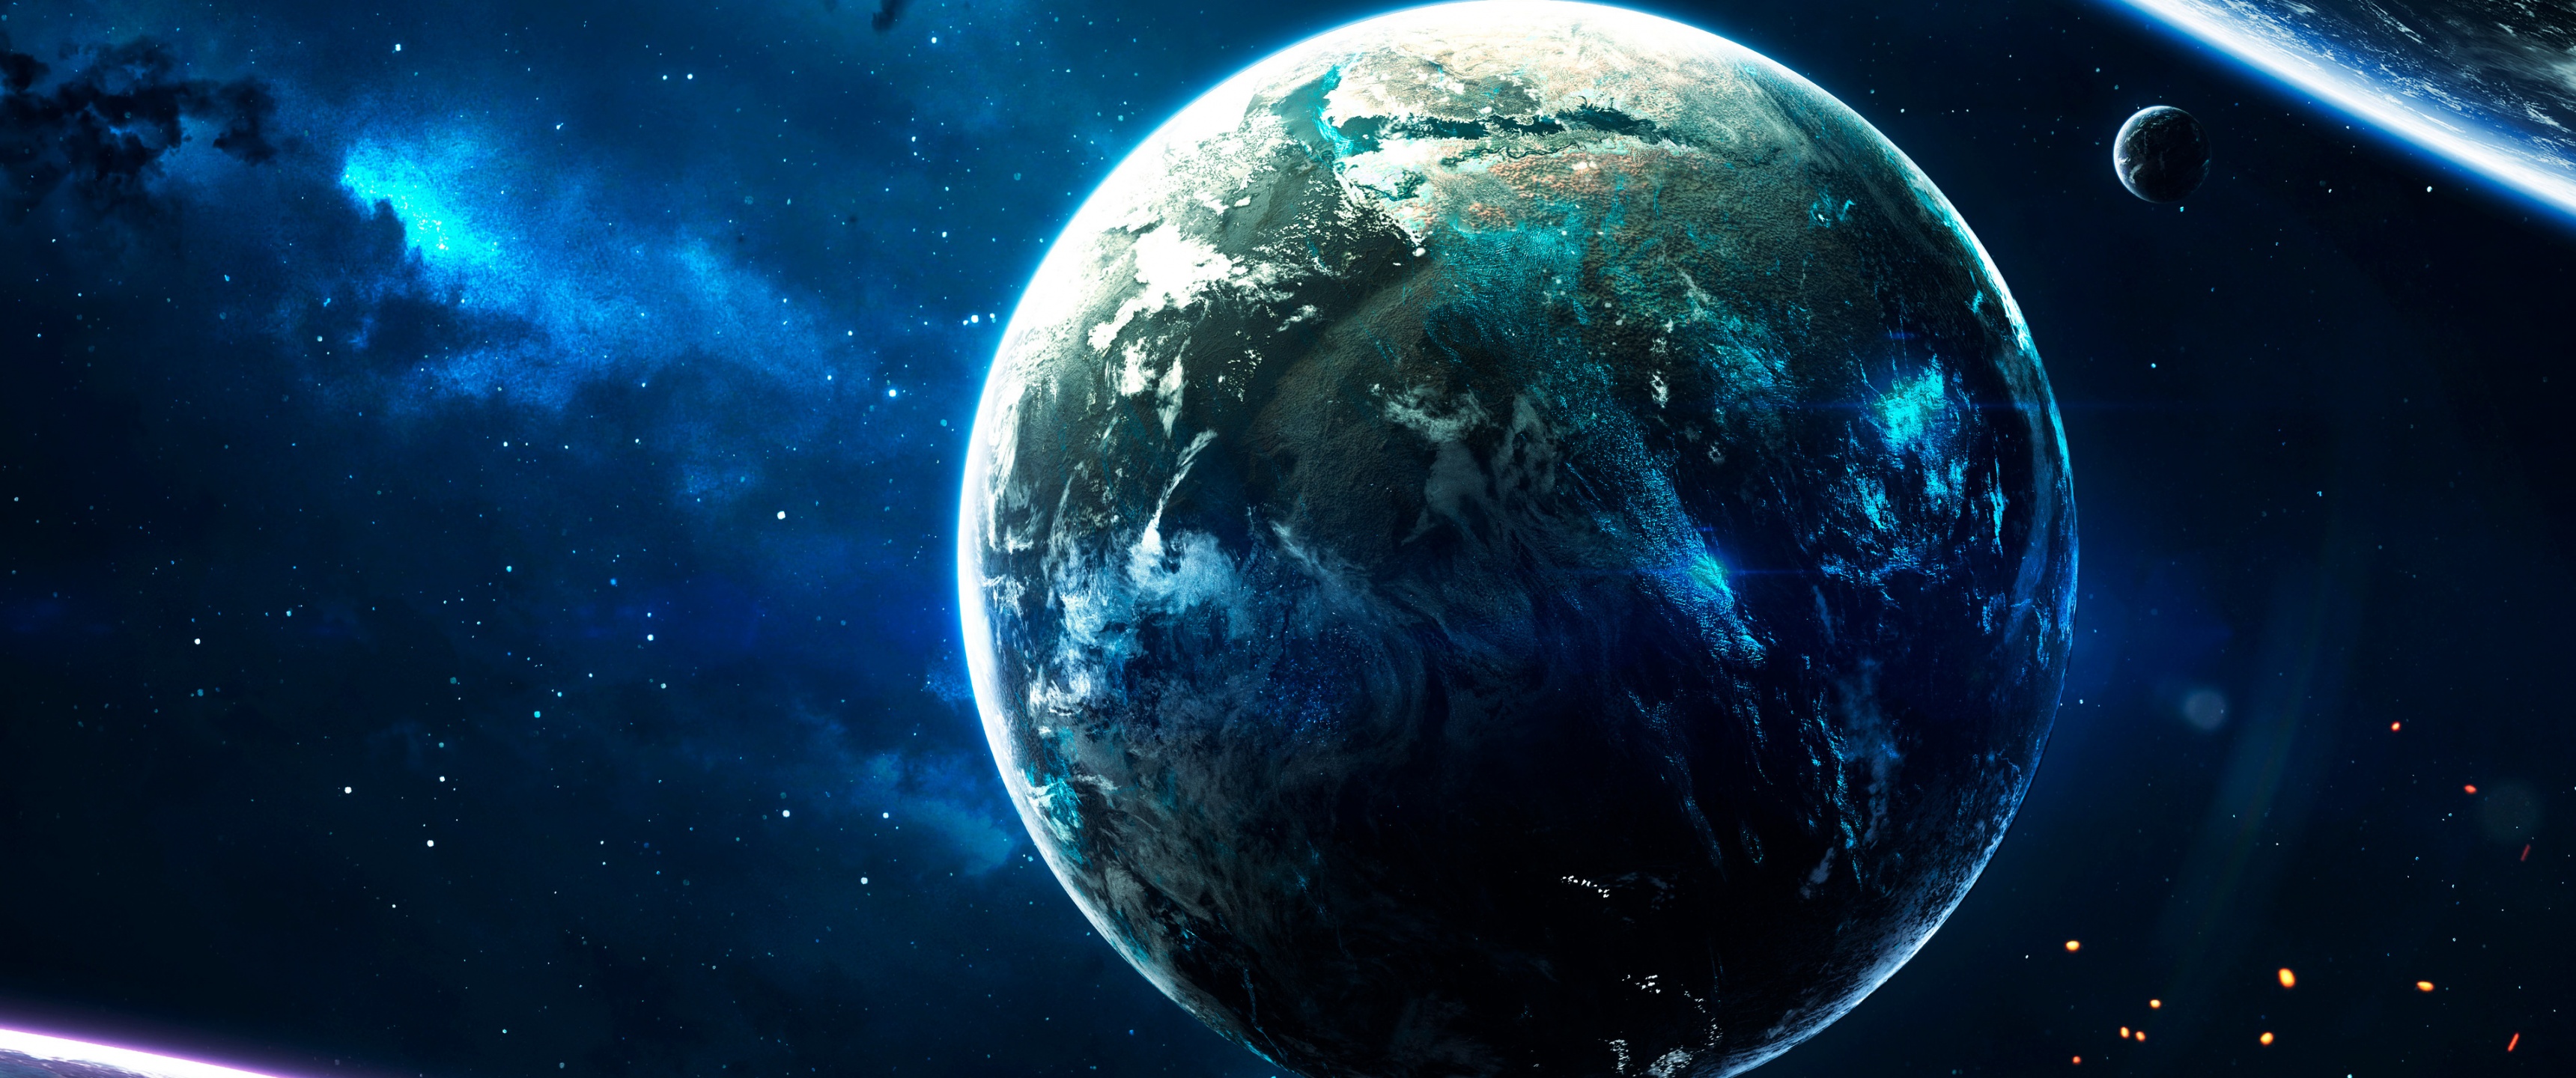 Earth Wallpaper 4K, Cosmos, Stars, Blue, Space